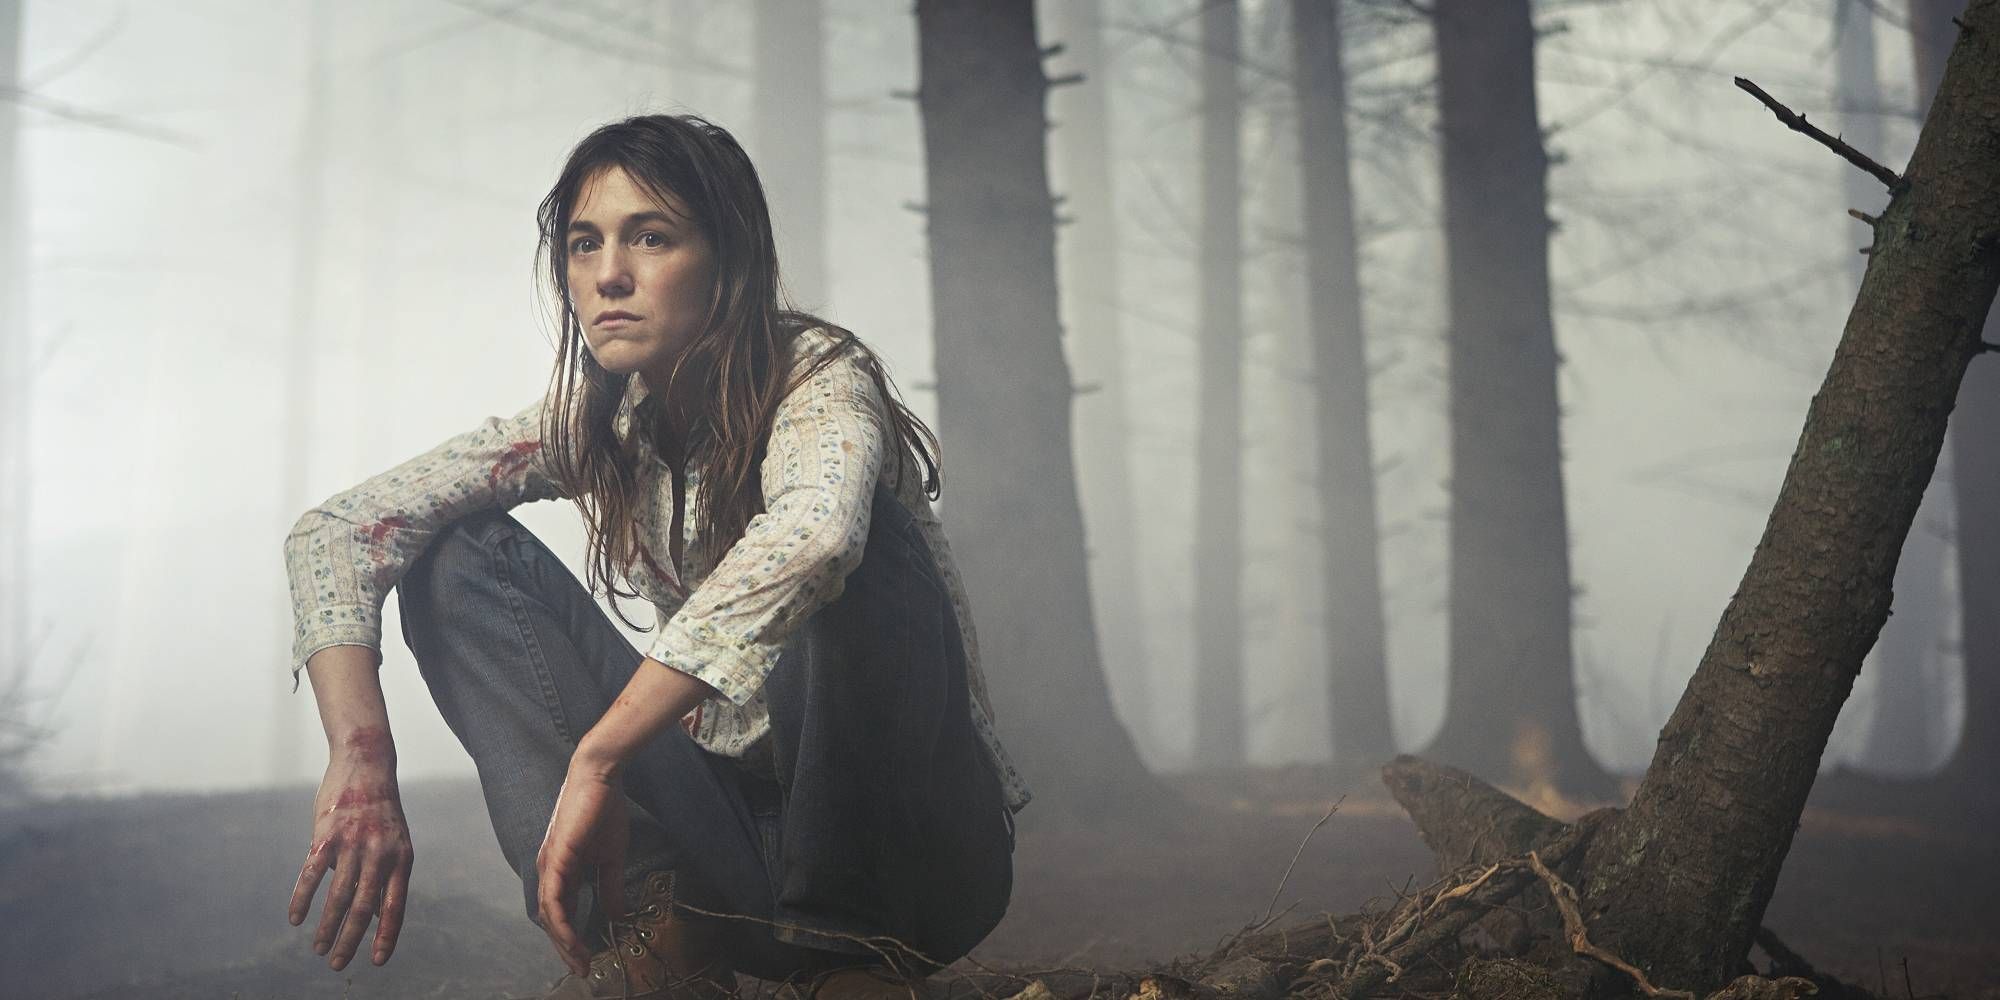 Charlotte Gainsbourg squatting down in a forest in Antichrist.